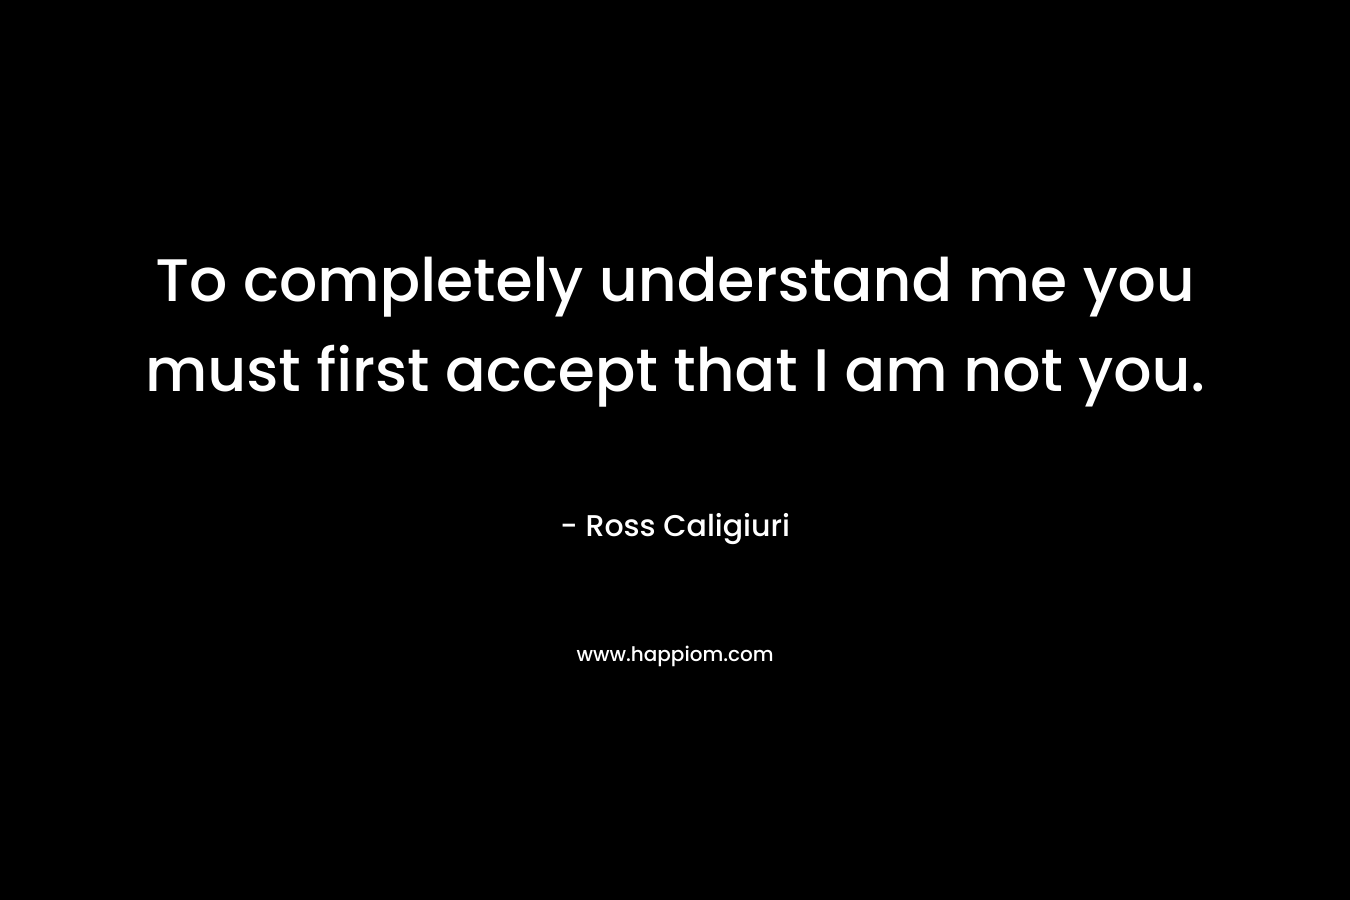 To completely understand me you must first accept that I am not you.